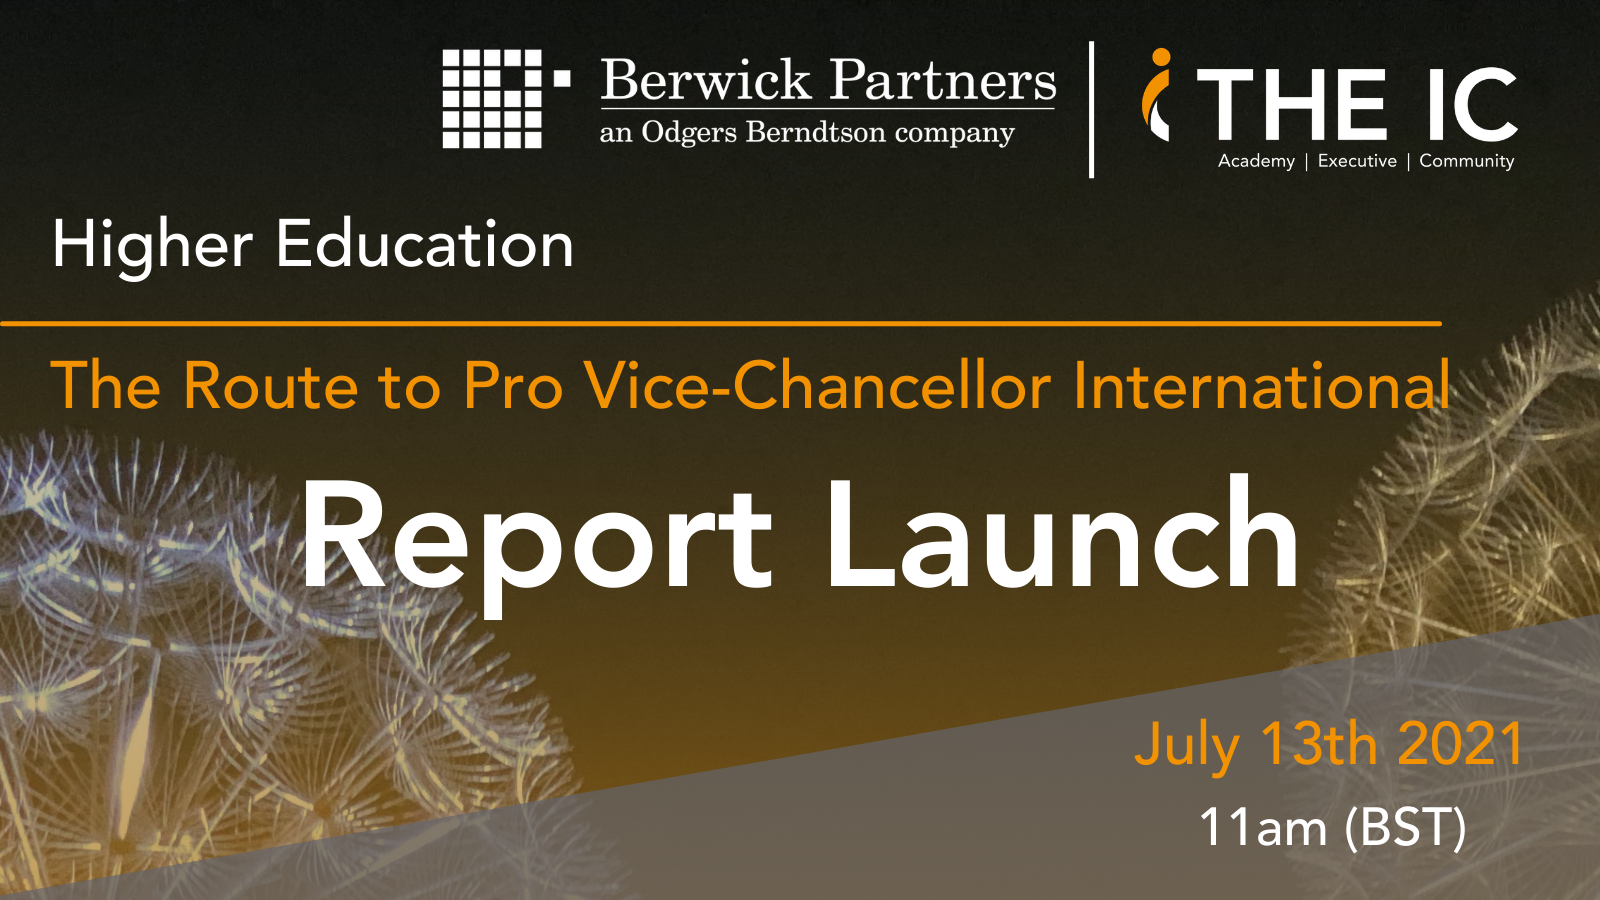 “Report Launch: The Route to Pro Vice-Chancellor International”